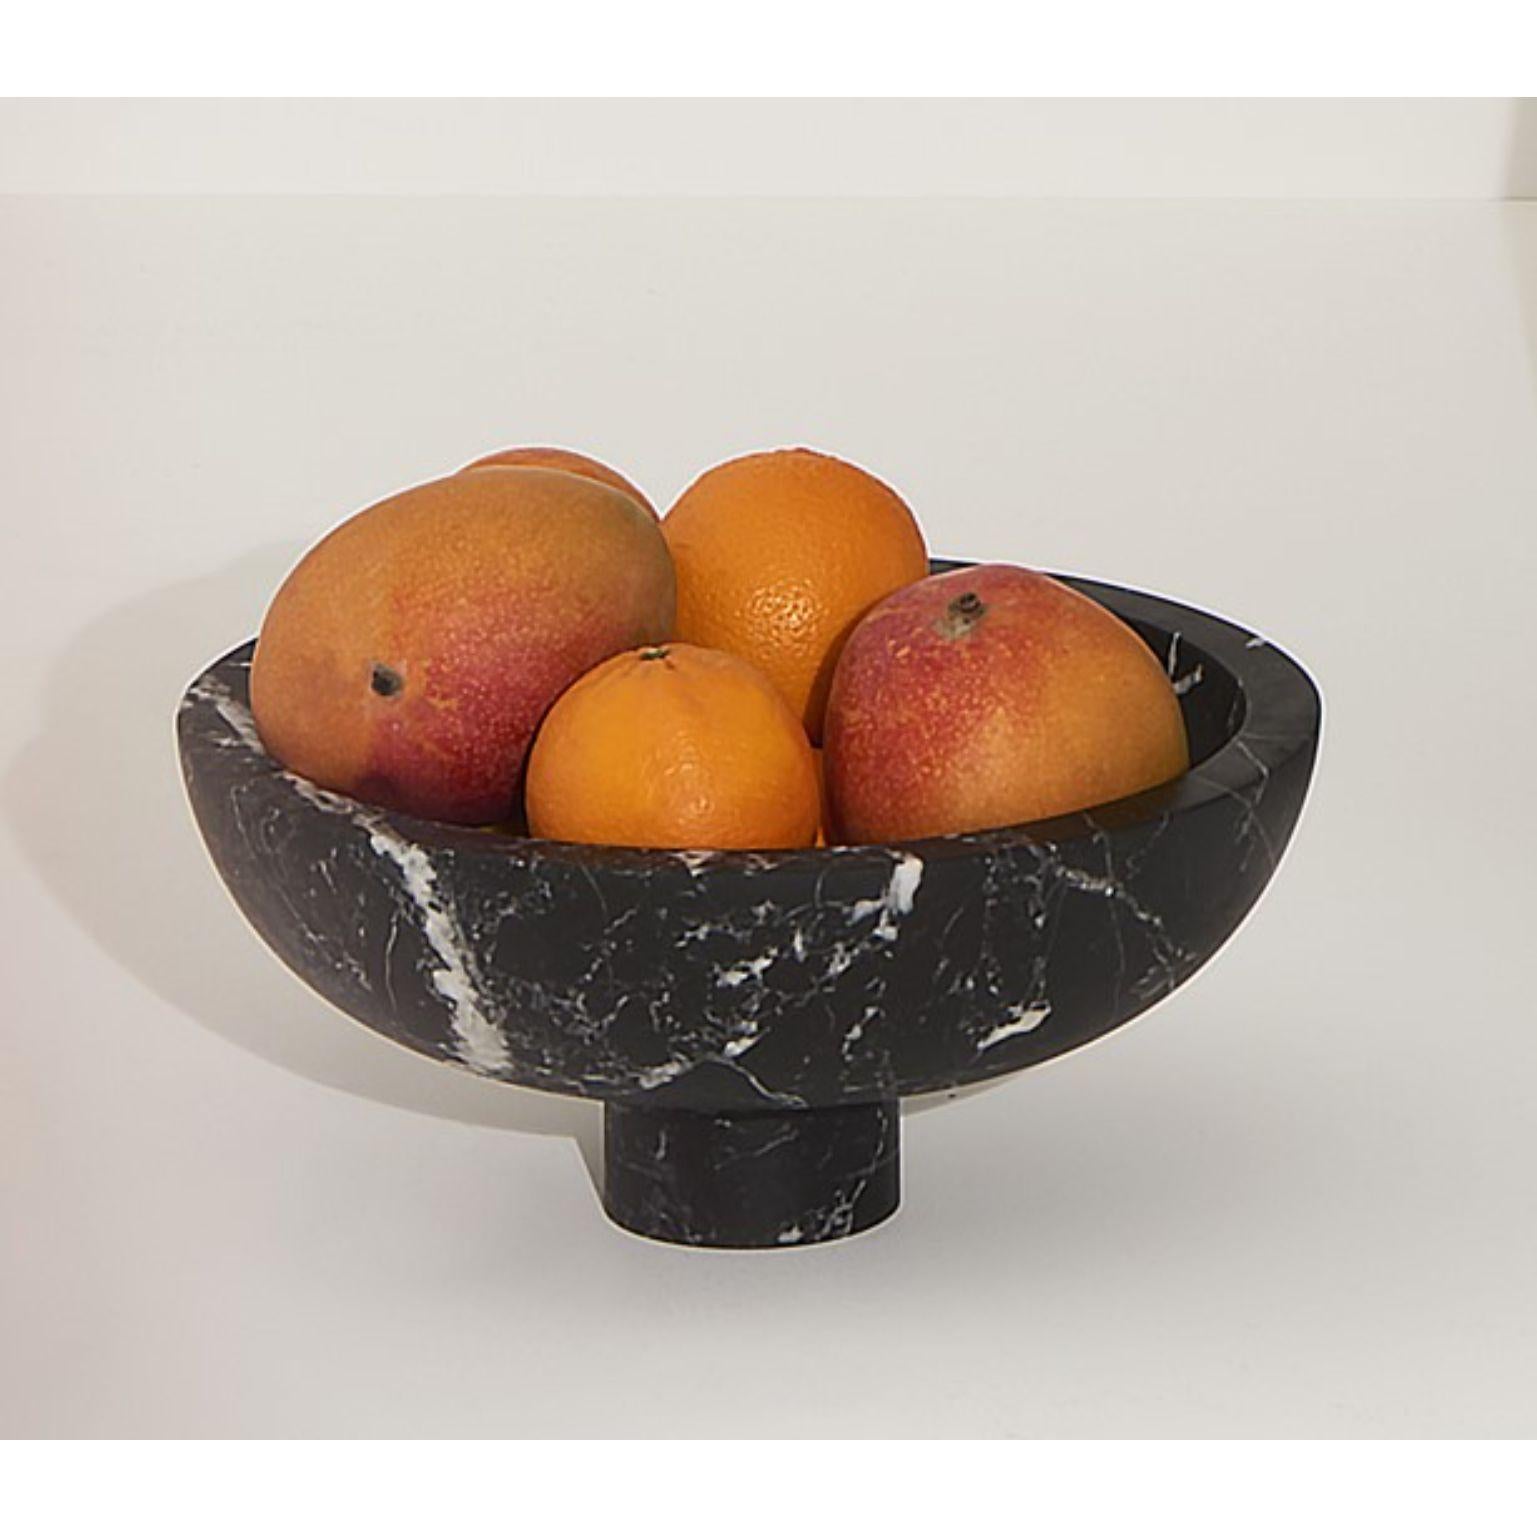 Inside out bowl by Karen Chekerdjian
Dimensions: 31 x 14 cm
Materials: Fior di Pesco Carnico


Also available: red, black, tobacco brown marbles

The value of change in a simple act. Karen Chekerdjian’s creation puts design front and centre: